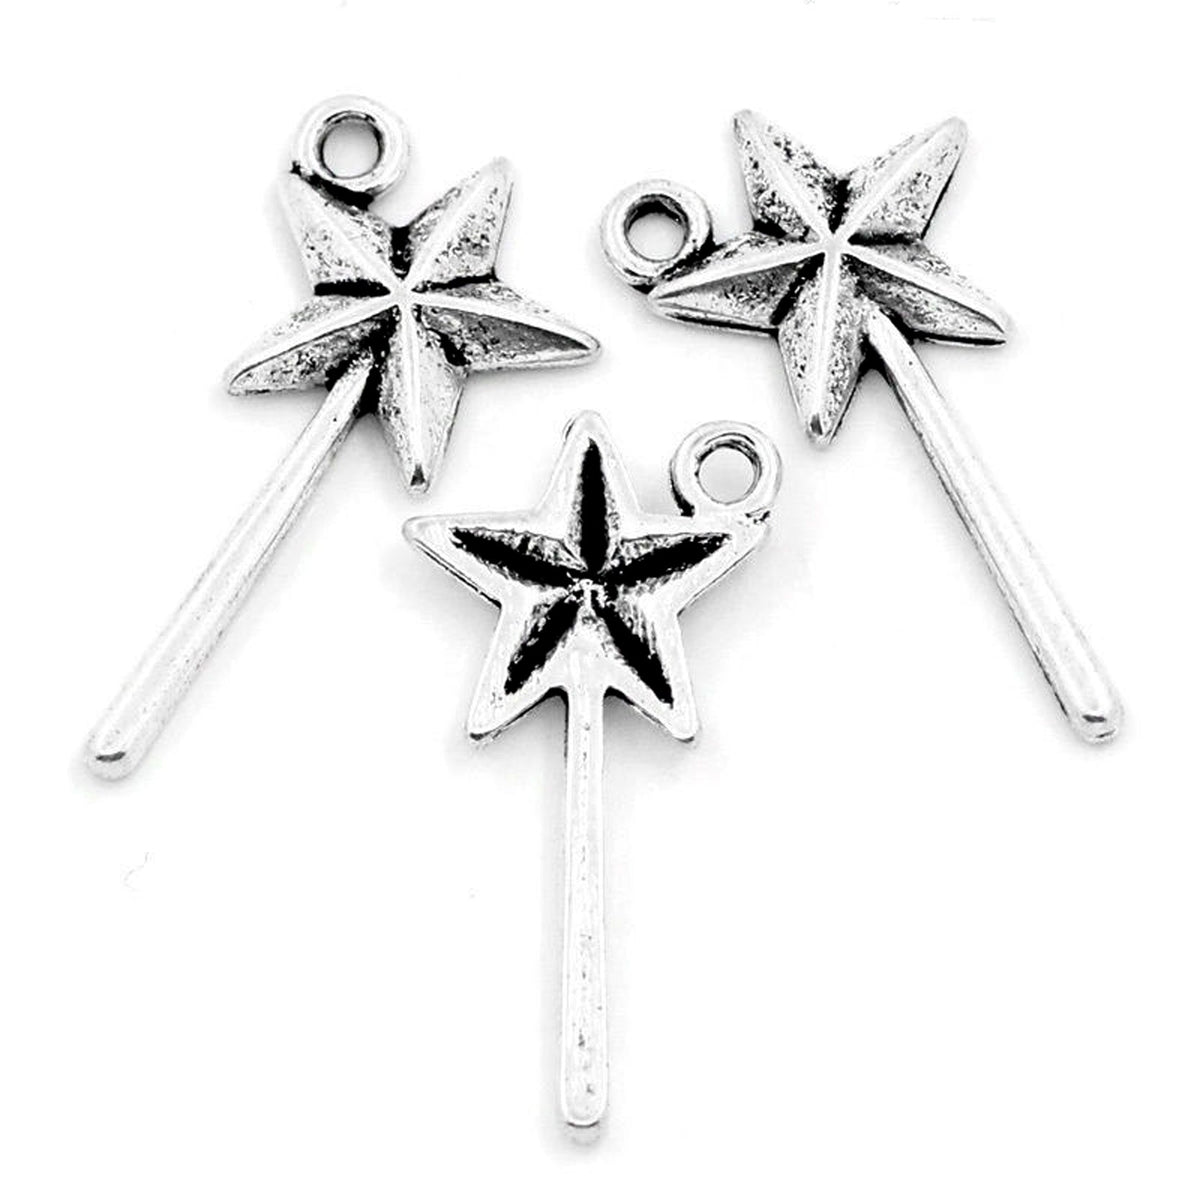 AVBeads Mixed Charms Fairy Charms Silver Metal 3101 10pcs